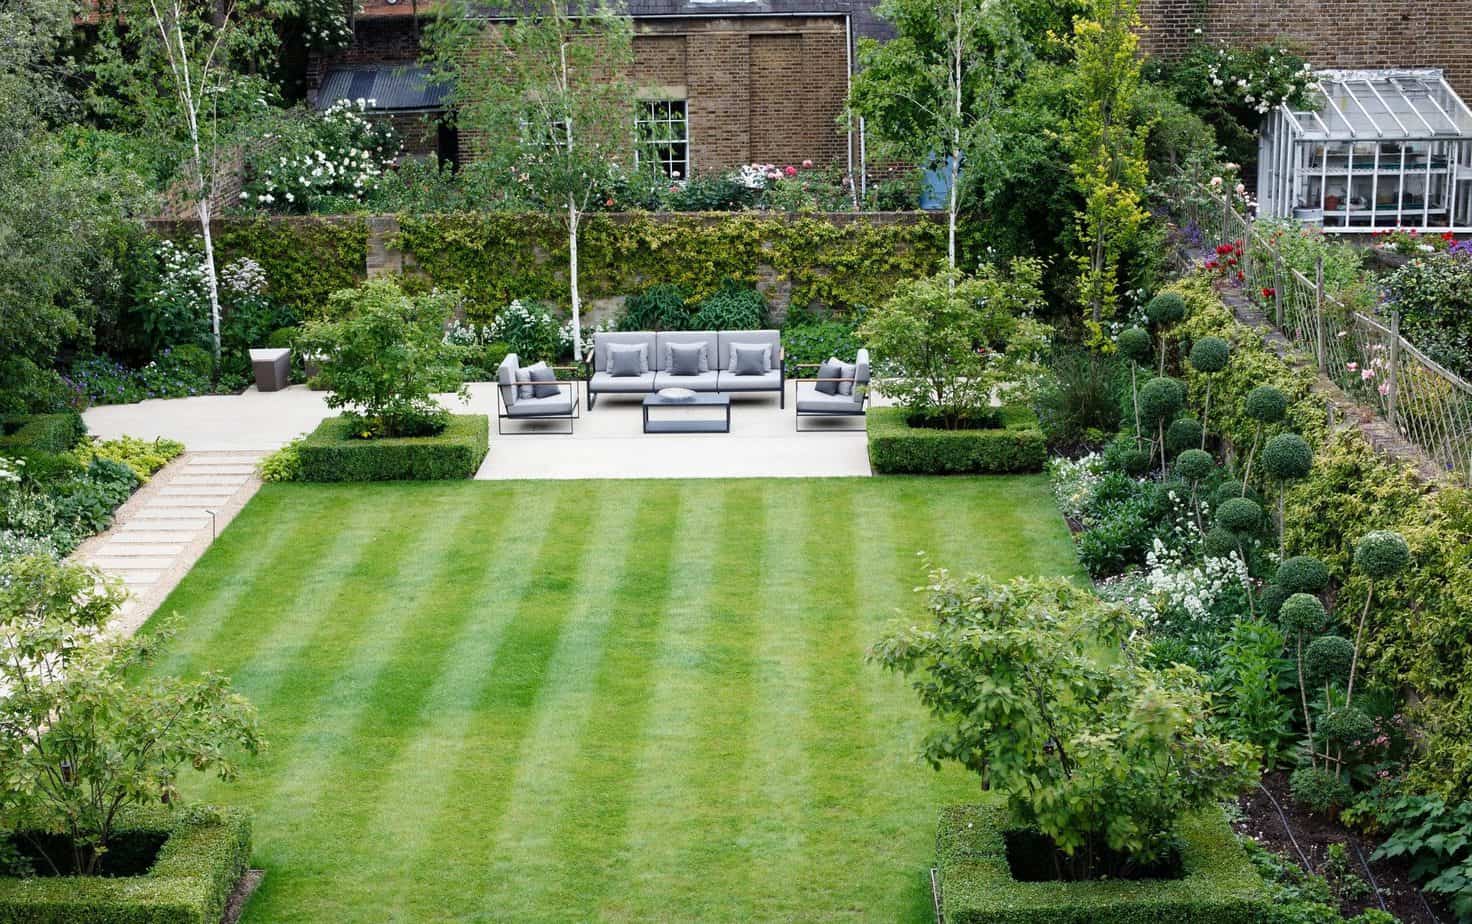 A well-kept lawn and perfectly pruned hedges